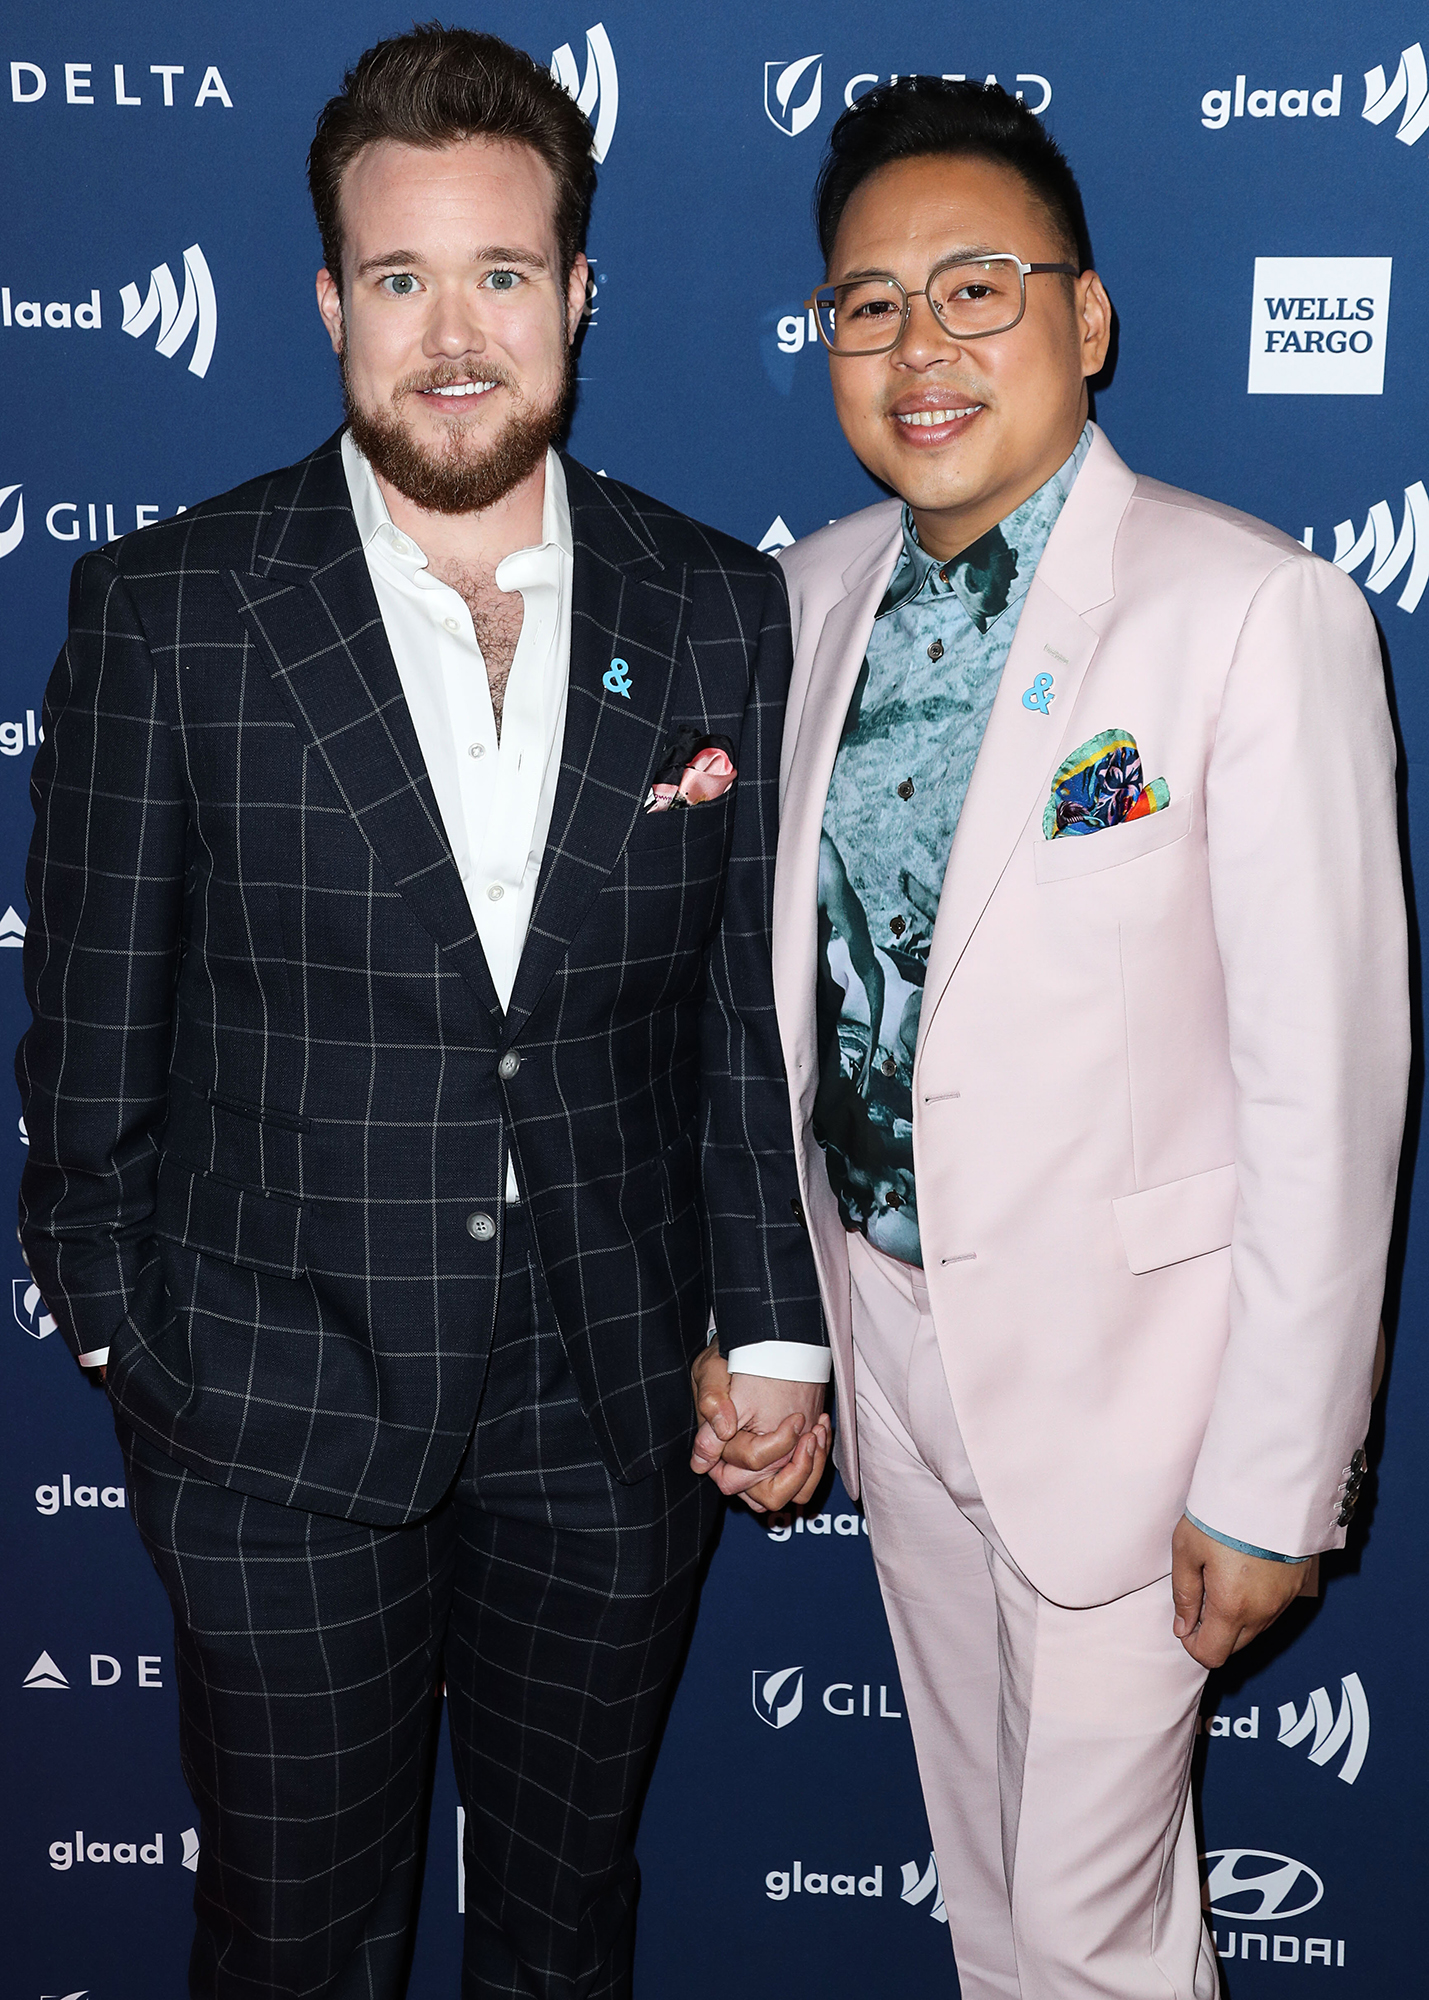 Superstore’s Nico Santos and 'Survivor' Alum Zeke Smith Get Engaged at 2022 GLAAD Media Awards